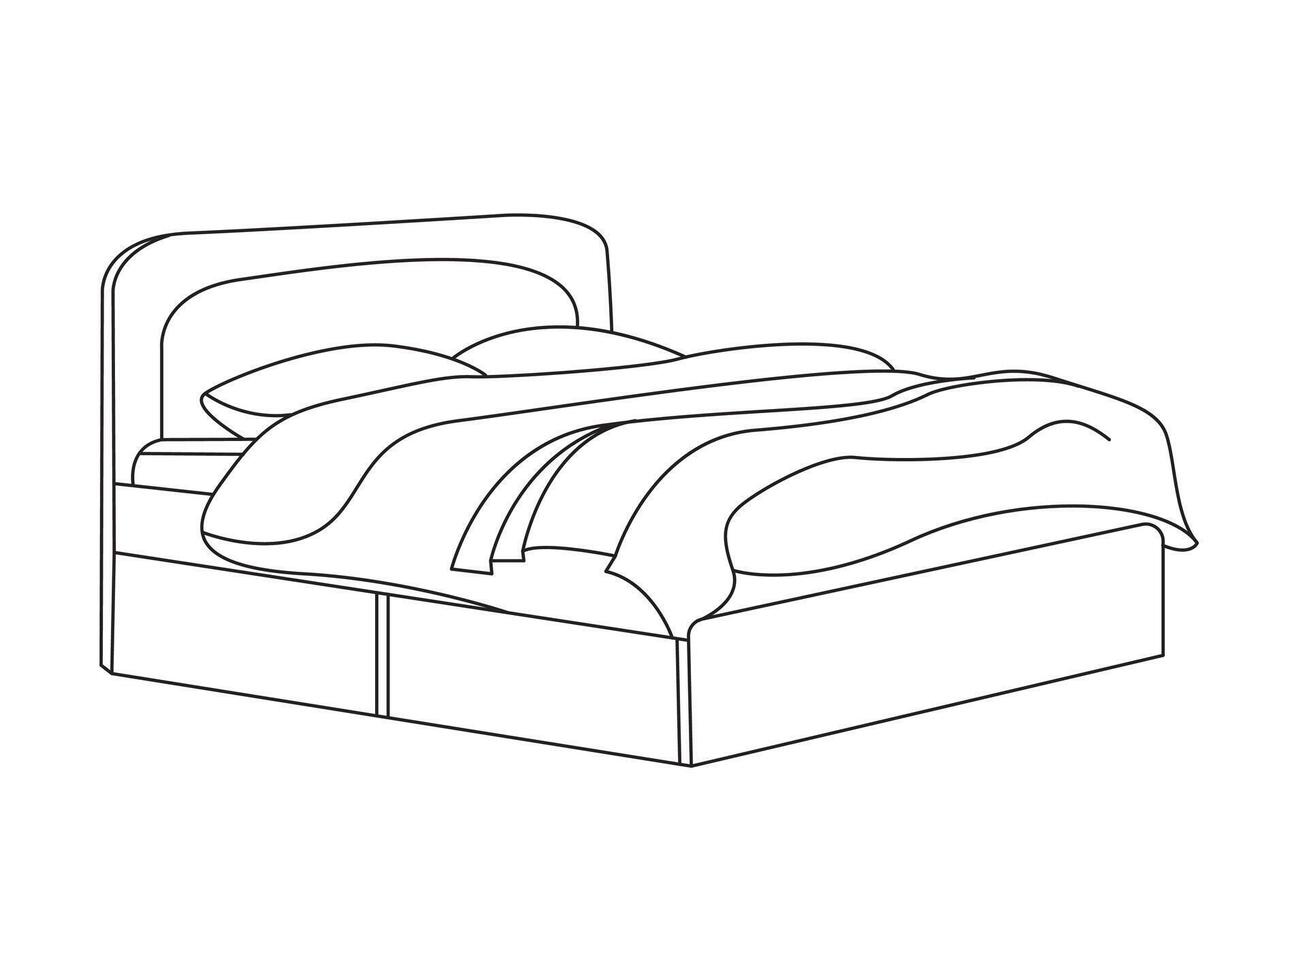 Bed doodle icon in vector. Hand drawn bed icon in vector. Doodle bed illustration, contemporary bedroom interior with Modern Upholstered Headboard, white bed featuring a cozy blanket vector